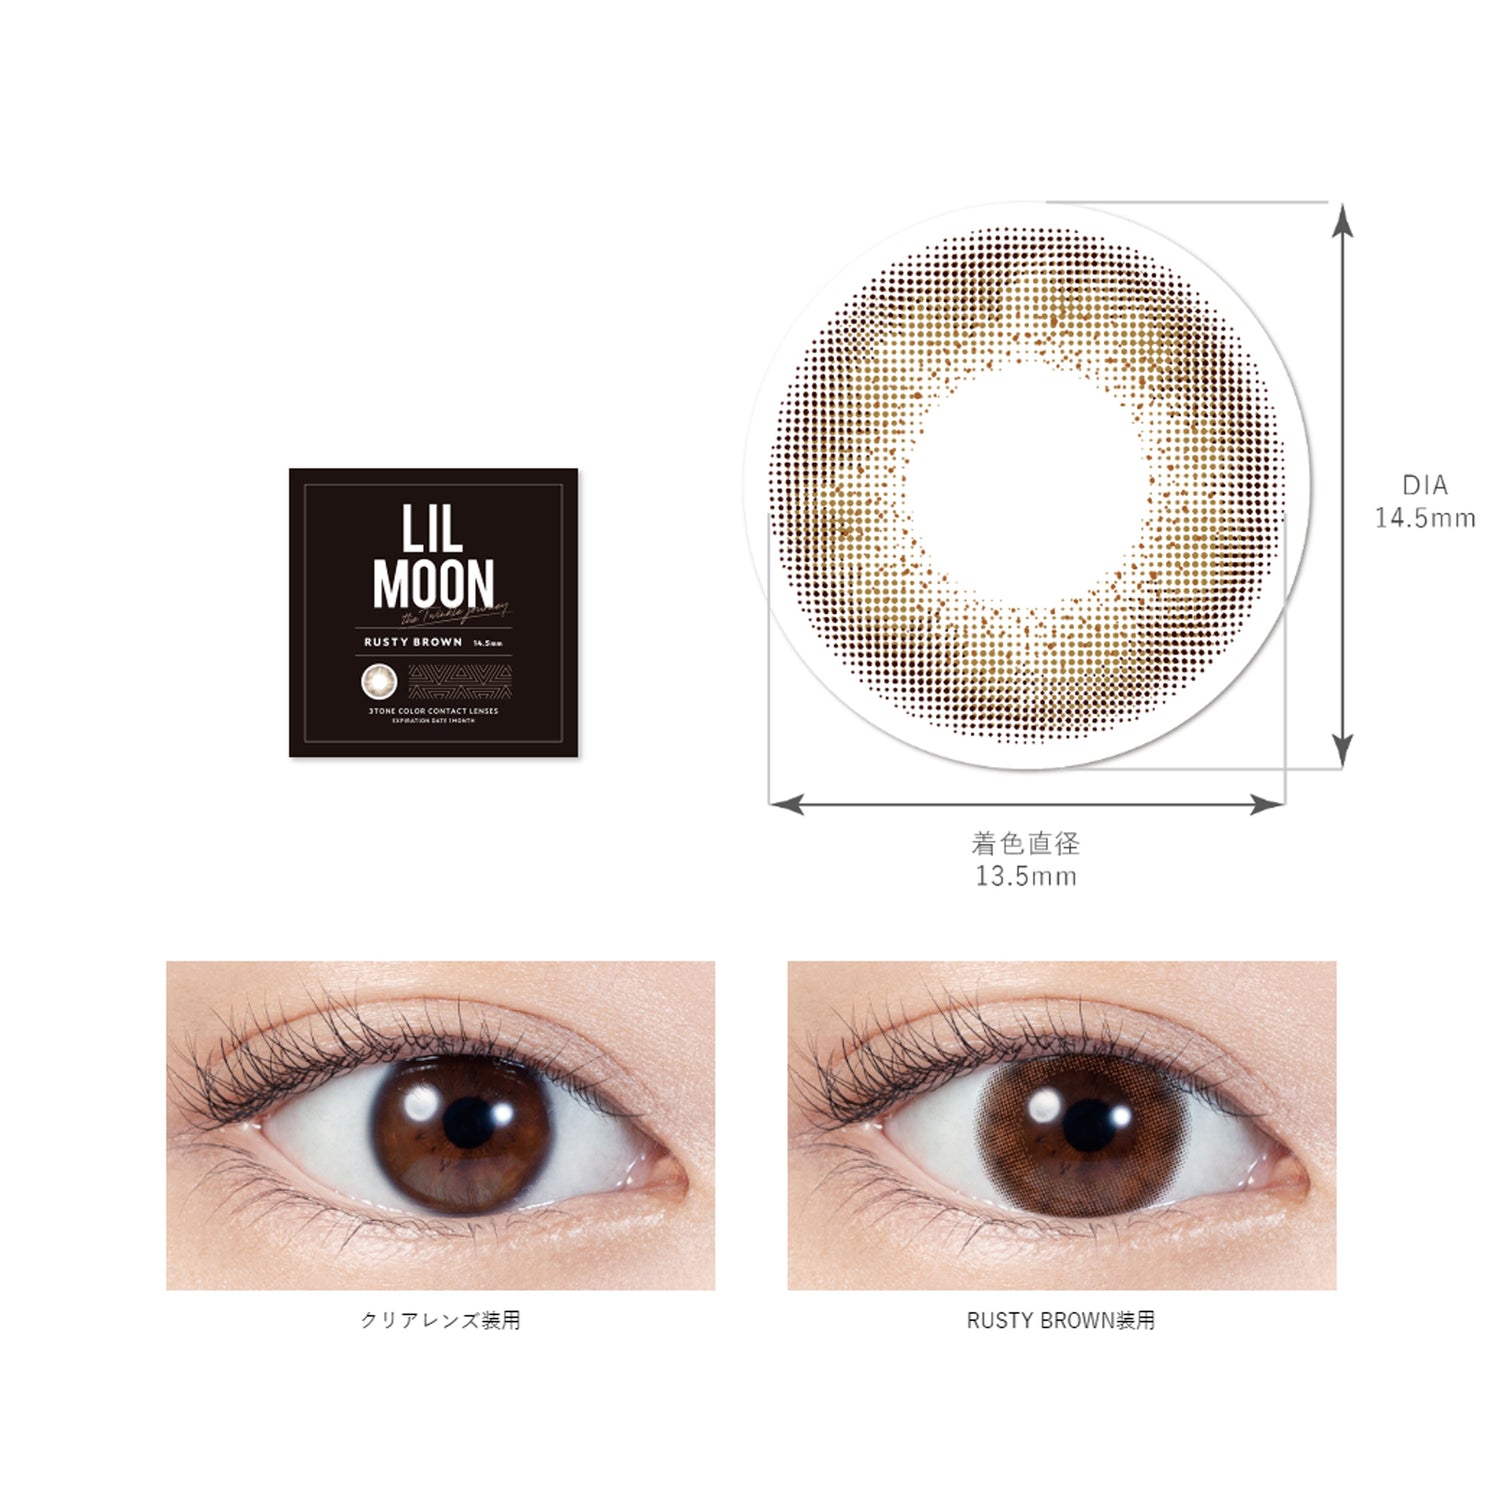 LIL MOON Monthly Contact Lenses-Rusty Brown